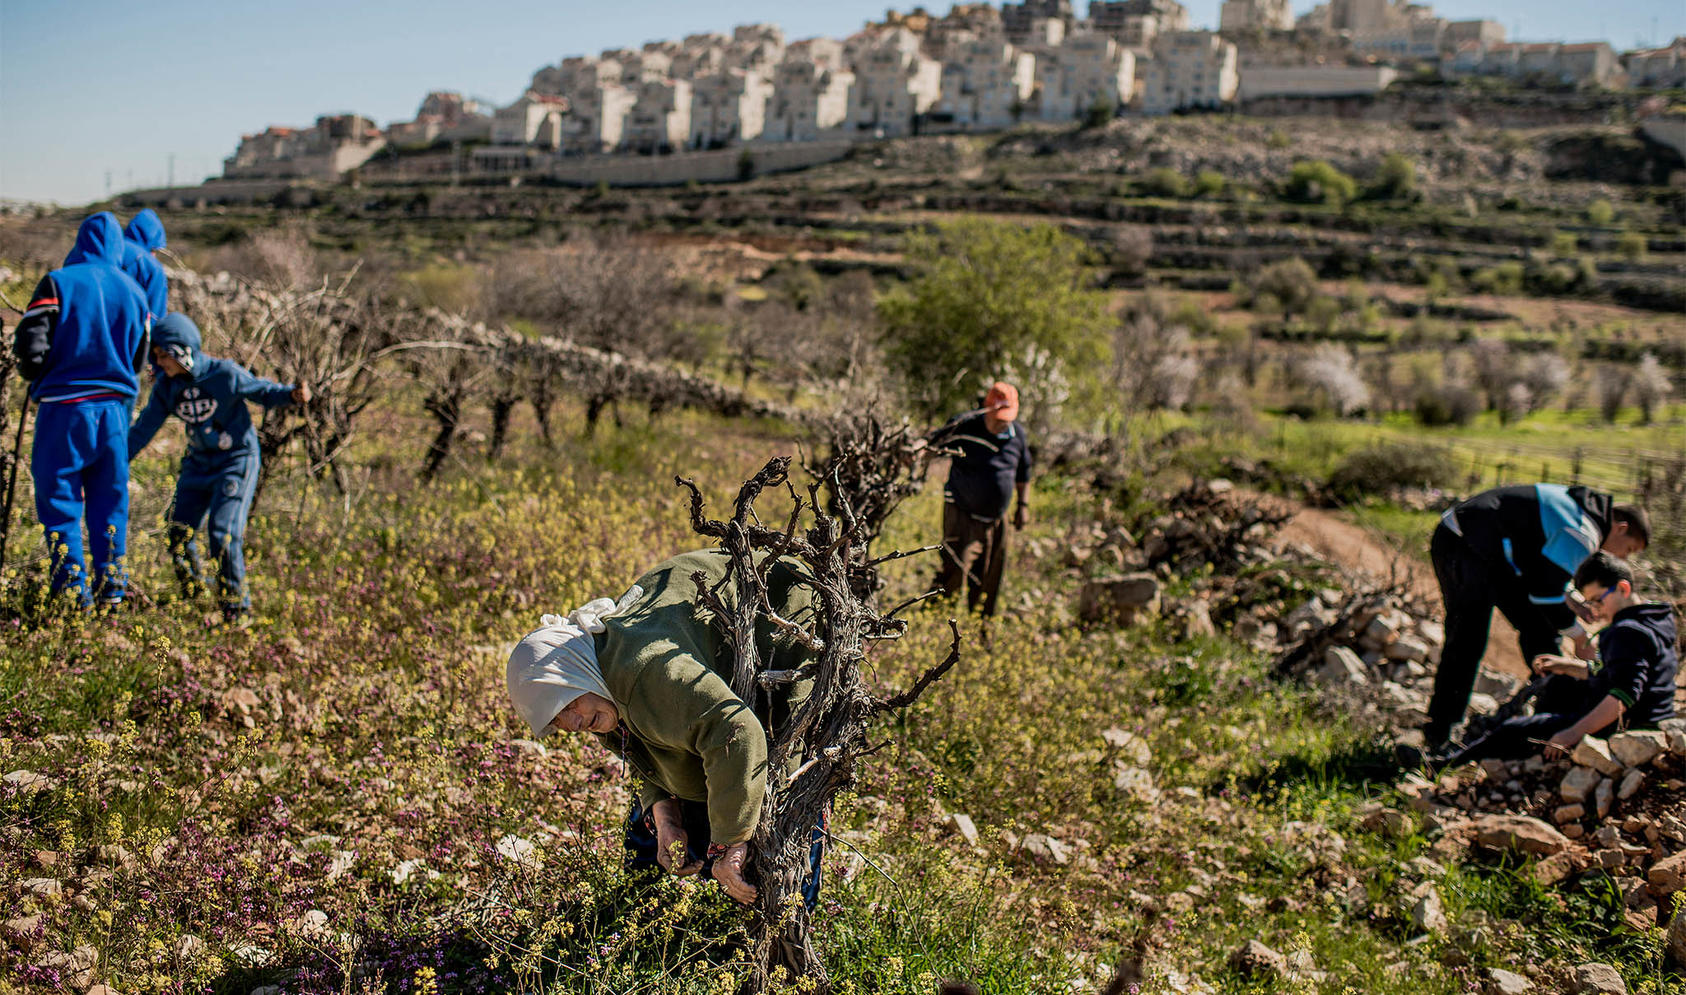 Palestinians work in a vineyard next to an Israeli settlement. Israel says it plans to annex lands amounting to as much as 30 percent of the West Bank, raising new fears of destabilization or violence in the conflict. (Tomas Munita/The New York Times)